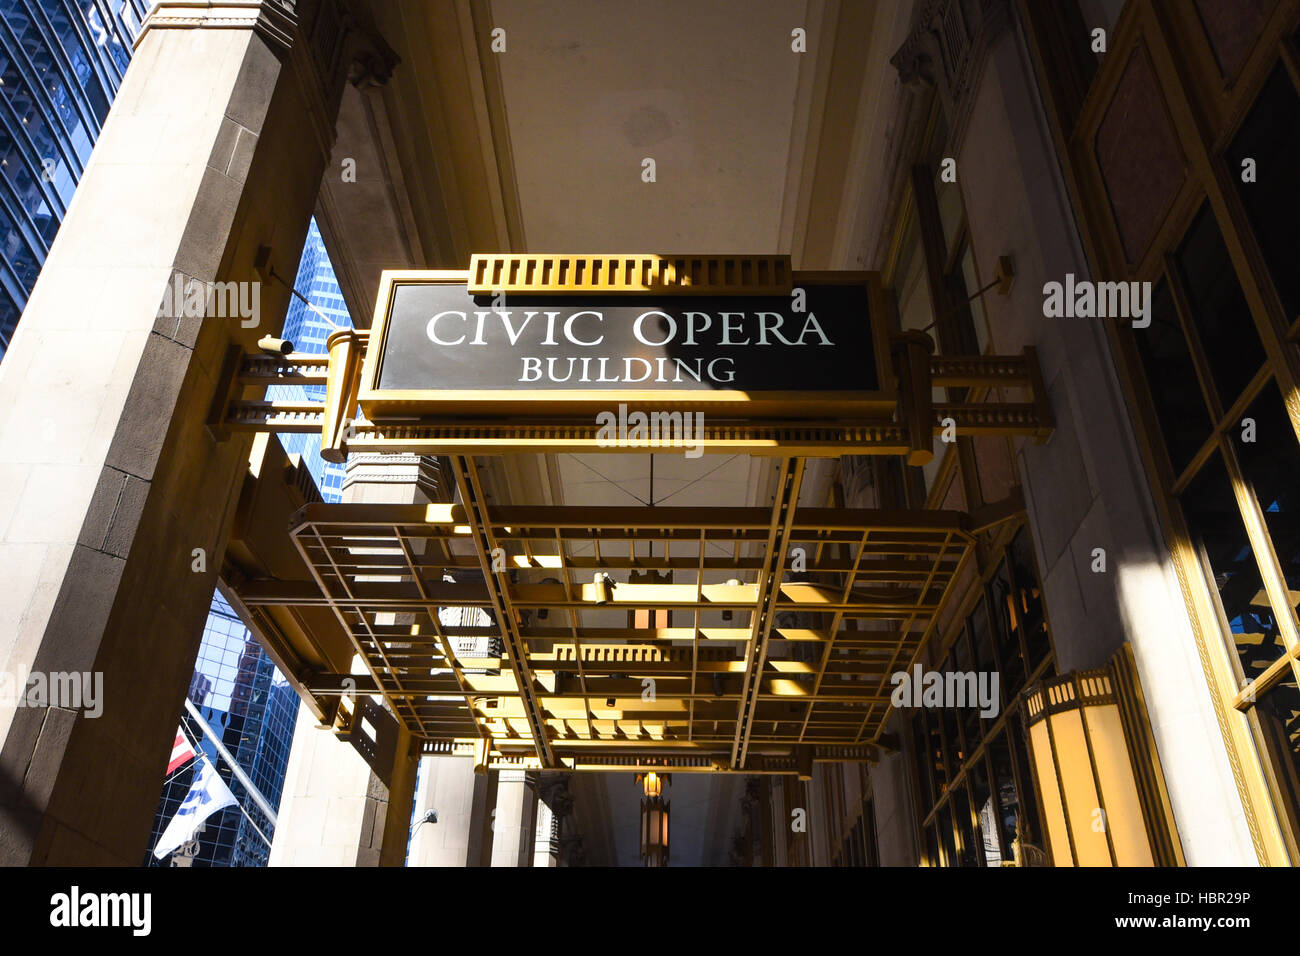 The Civic Opera House is an opera house located at 20 North Wacker Drive in Chicago. It is part of a structure which contains a 45-story office tower Stock Photo